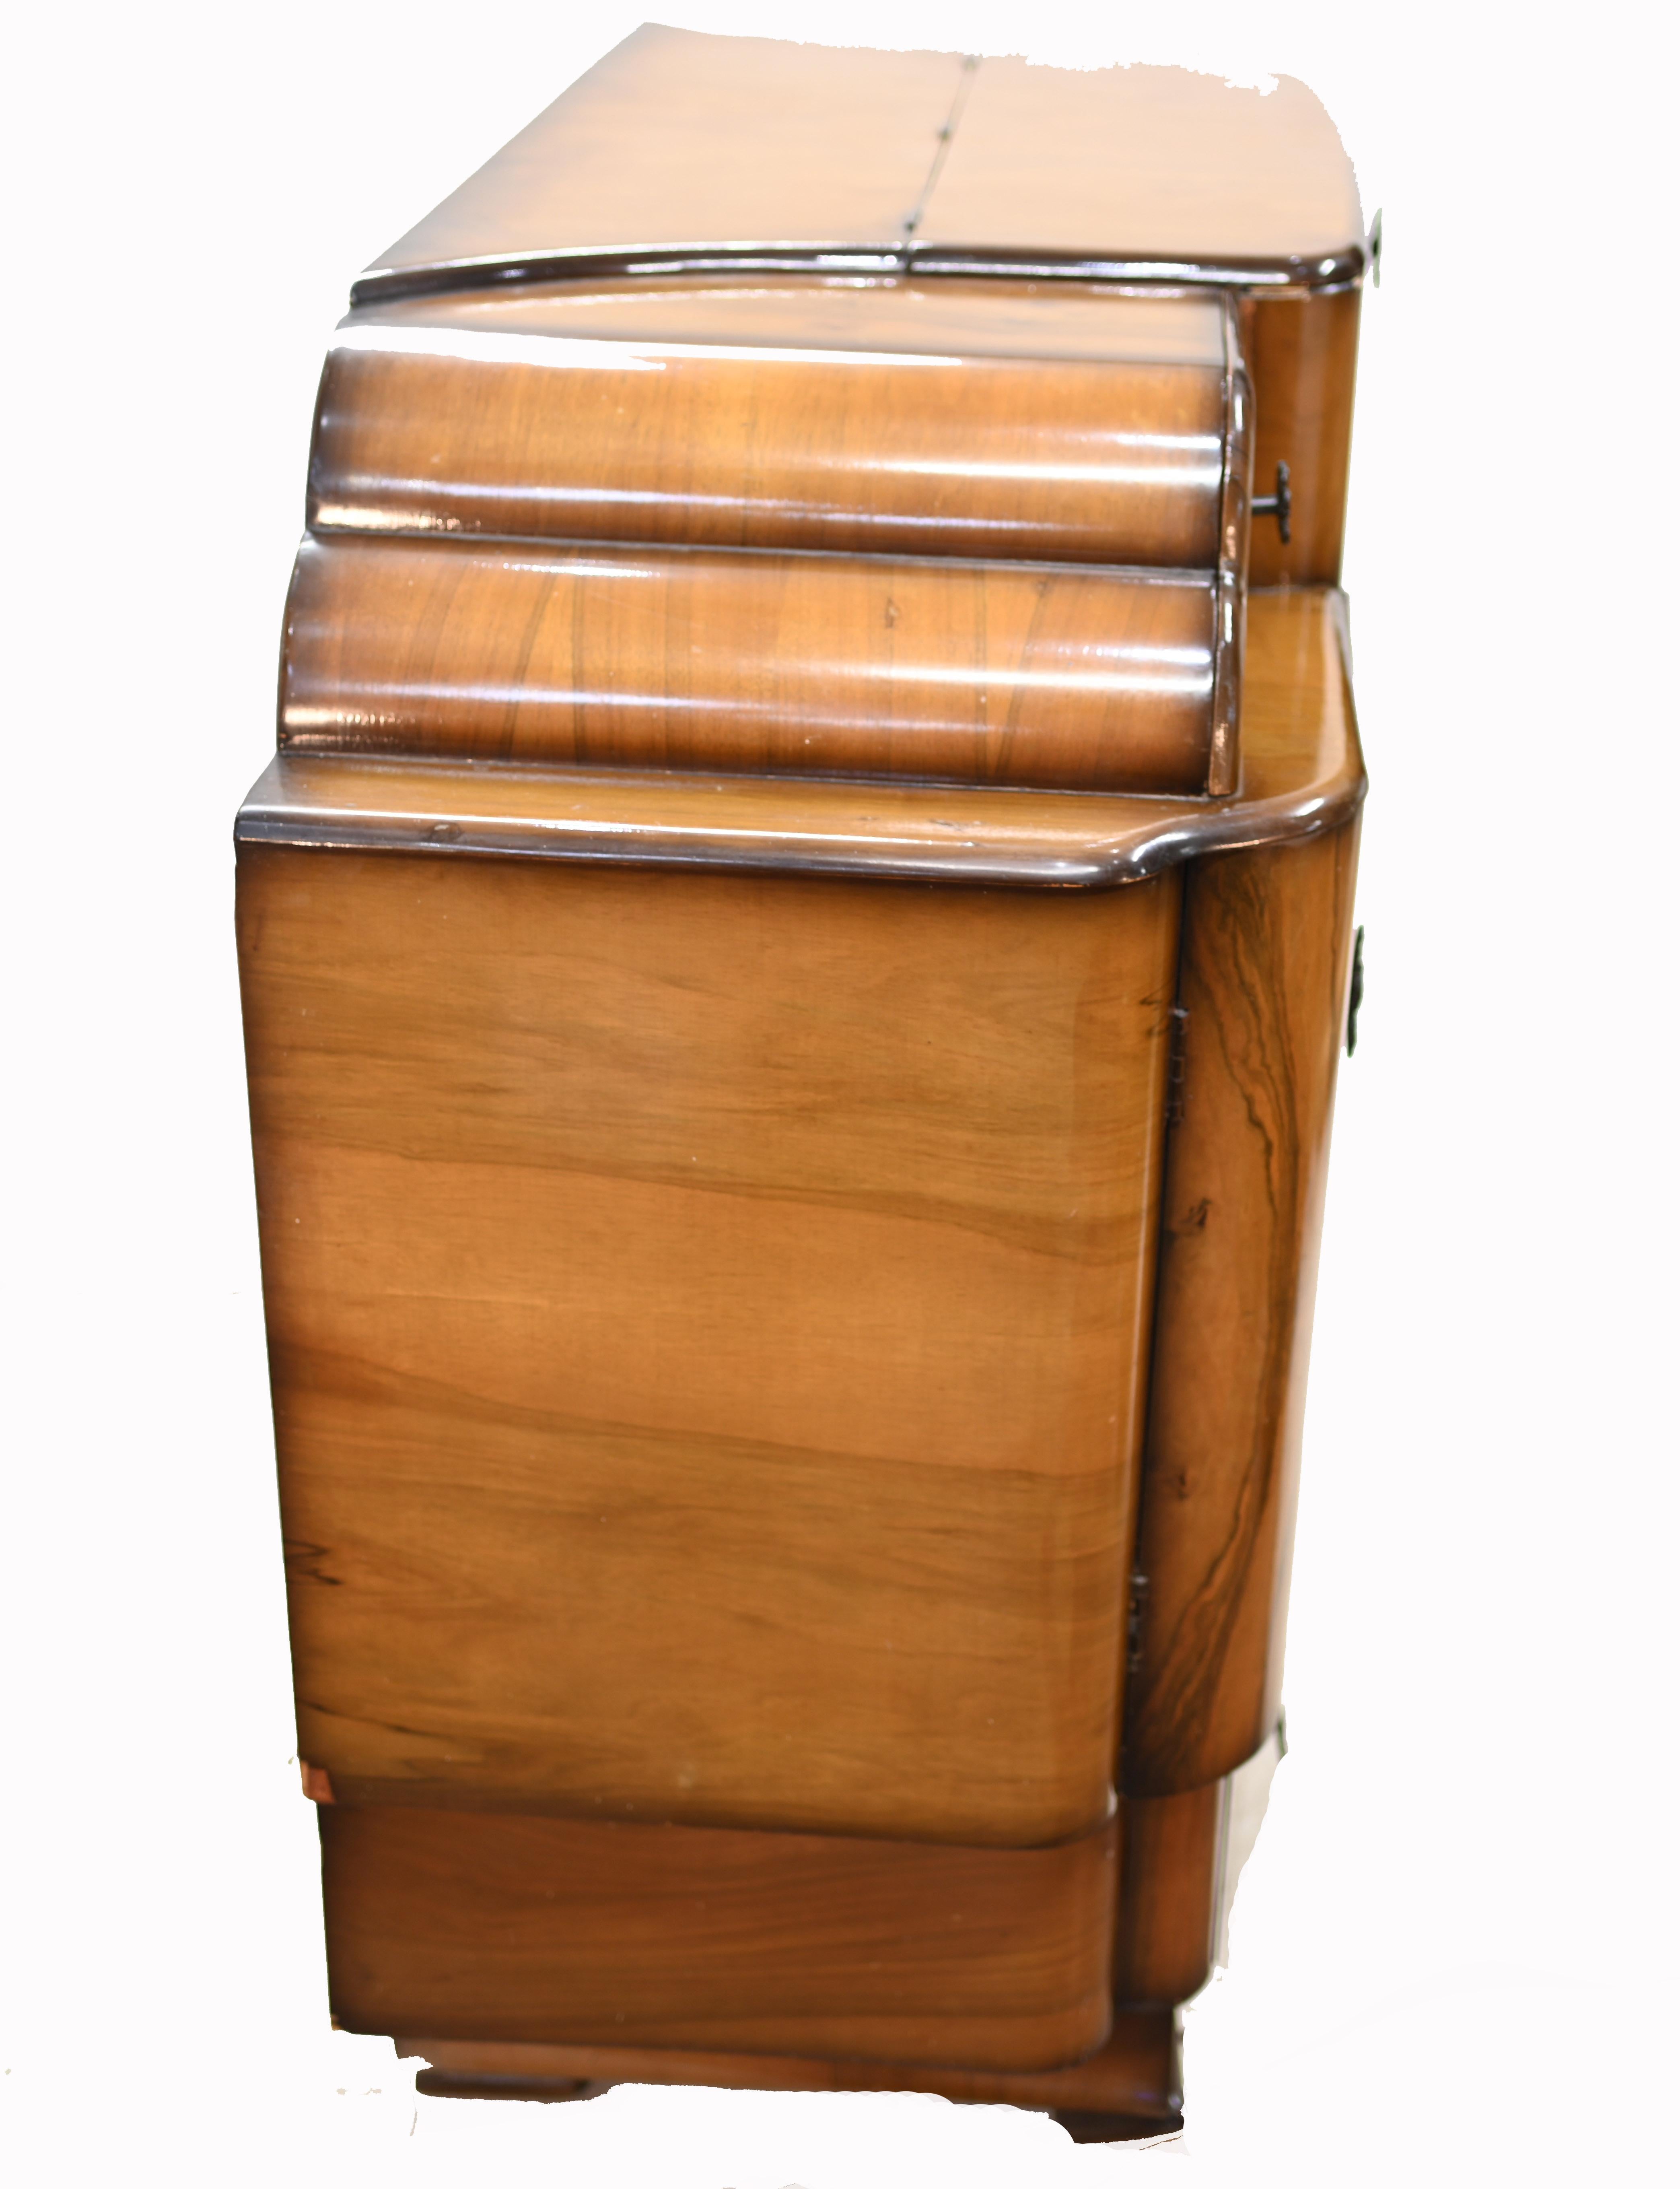 Mid-20th Century Period Art Deco Cocktail Cabinet Vintage Drinks Chest 1930